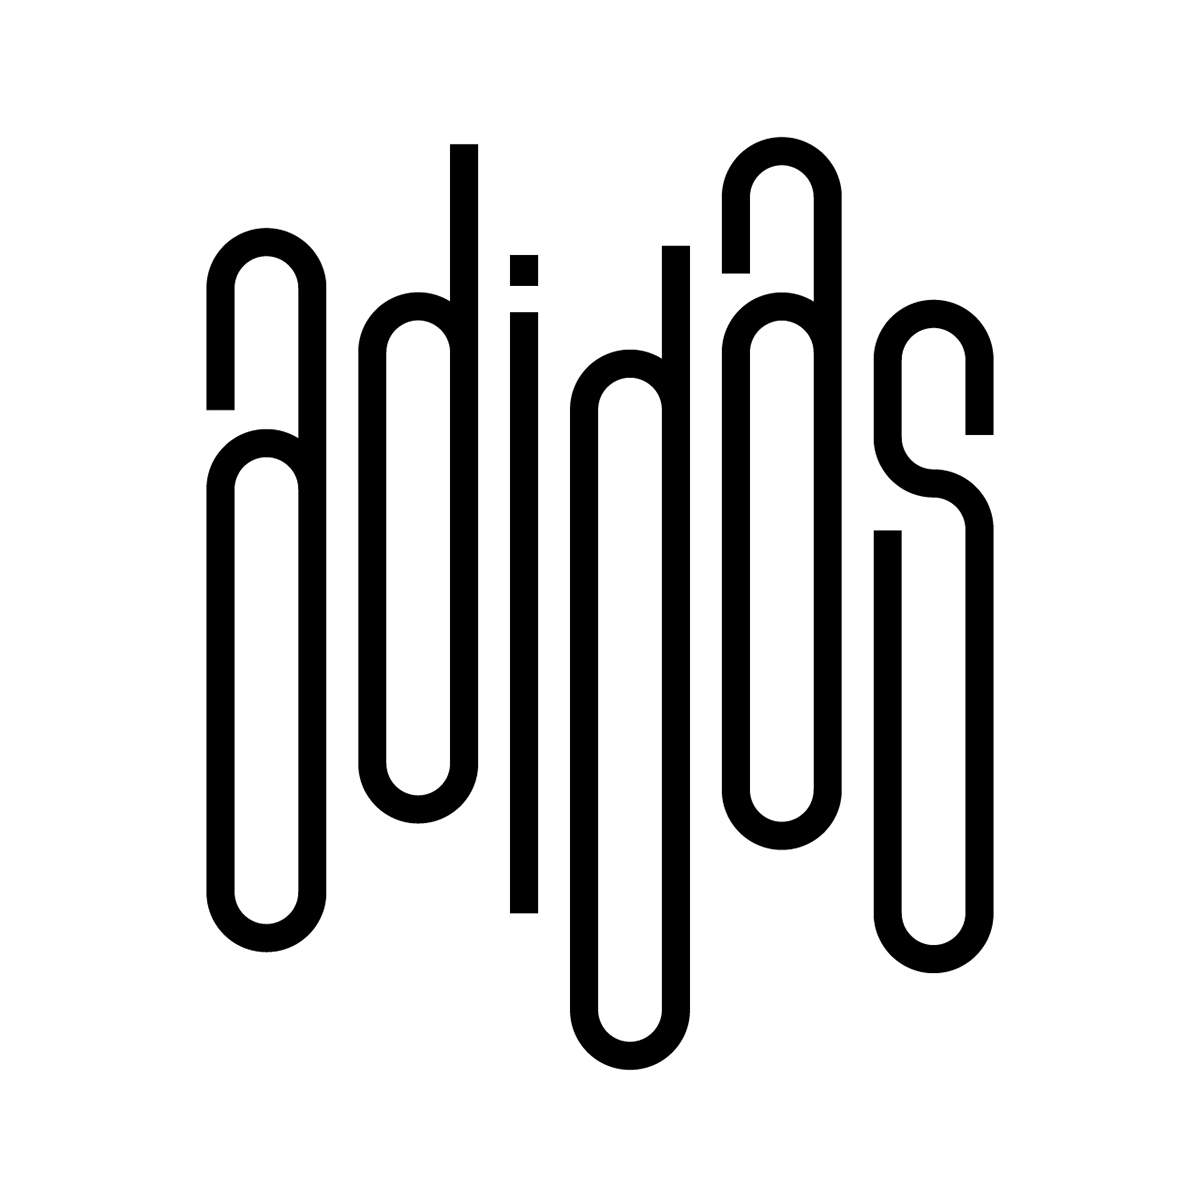 star wars adidas mother Chewbacca Avengers nyc New York typography   type Central Park